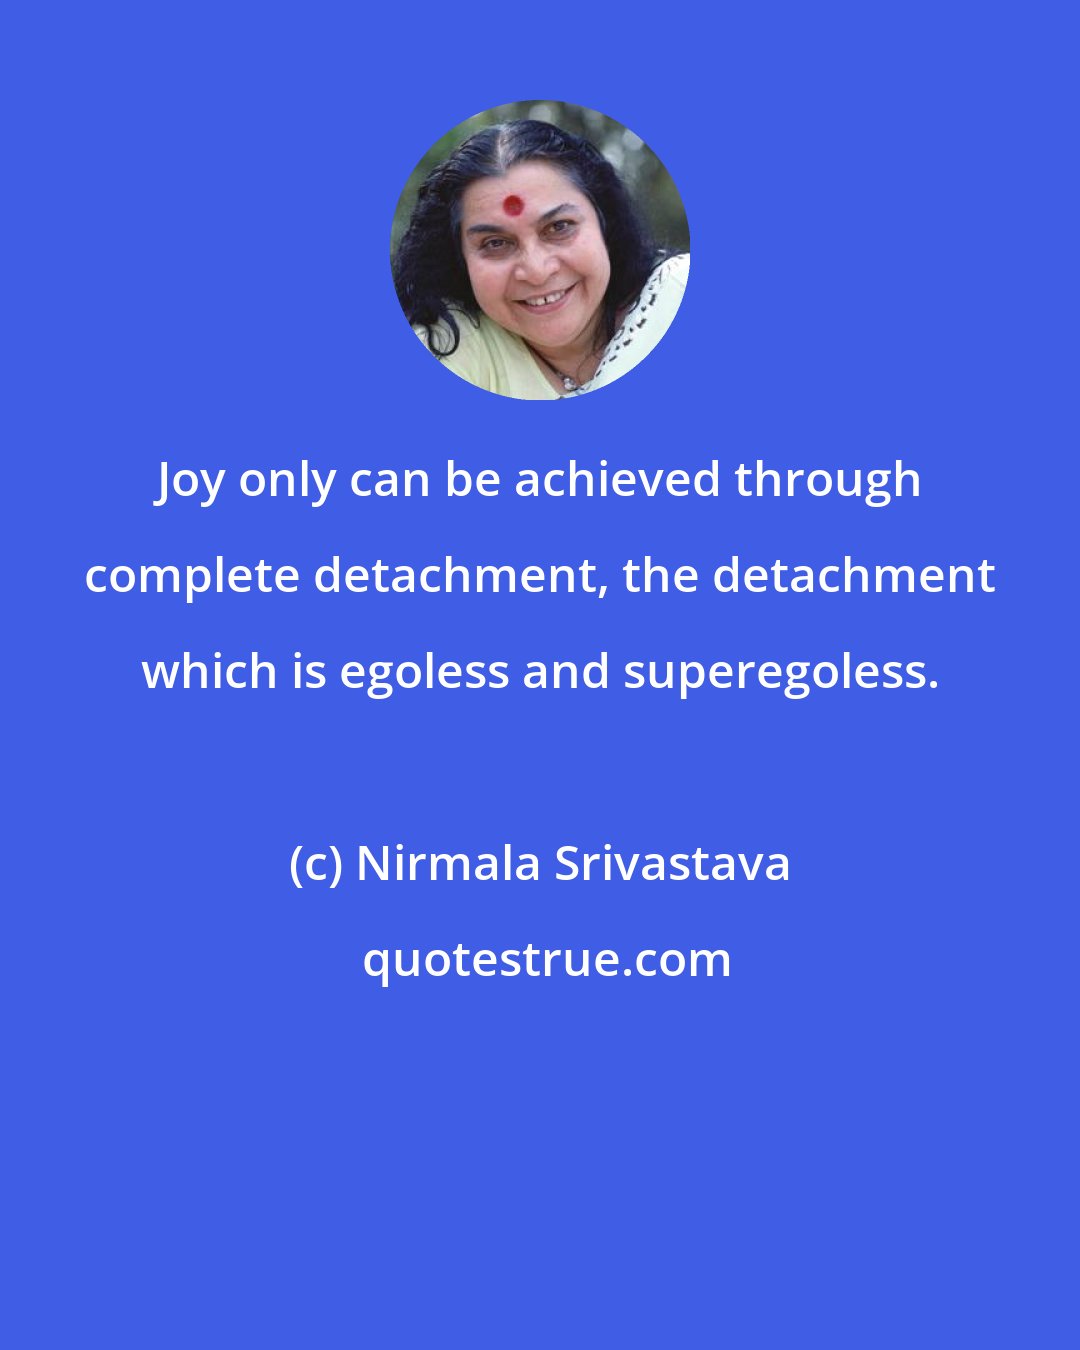 Nirmala Srivastava: Joy only can be achieved through complete detachment, the detachment which is egoless and superegoless.